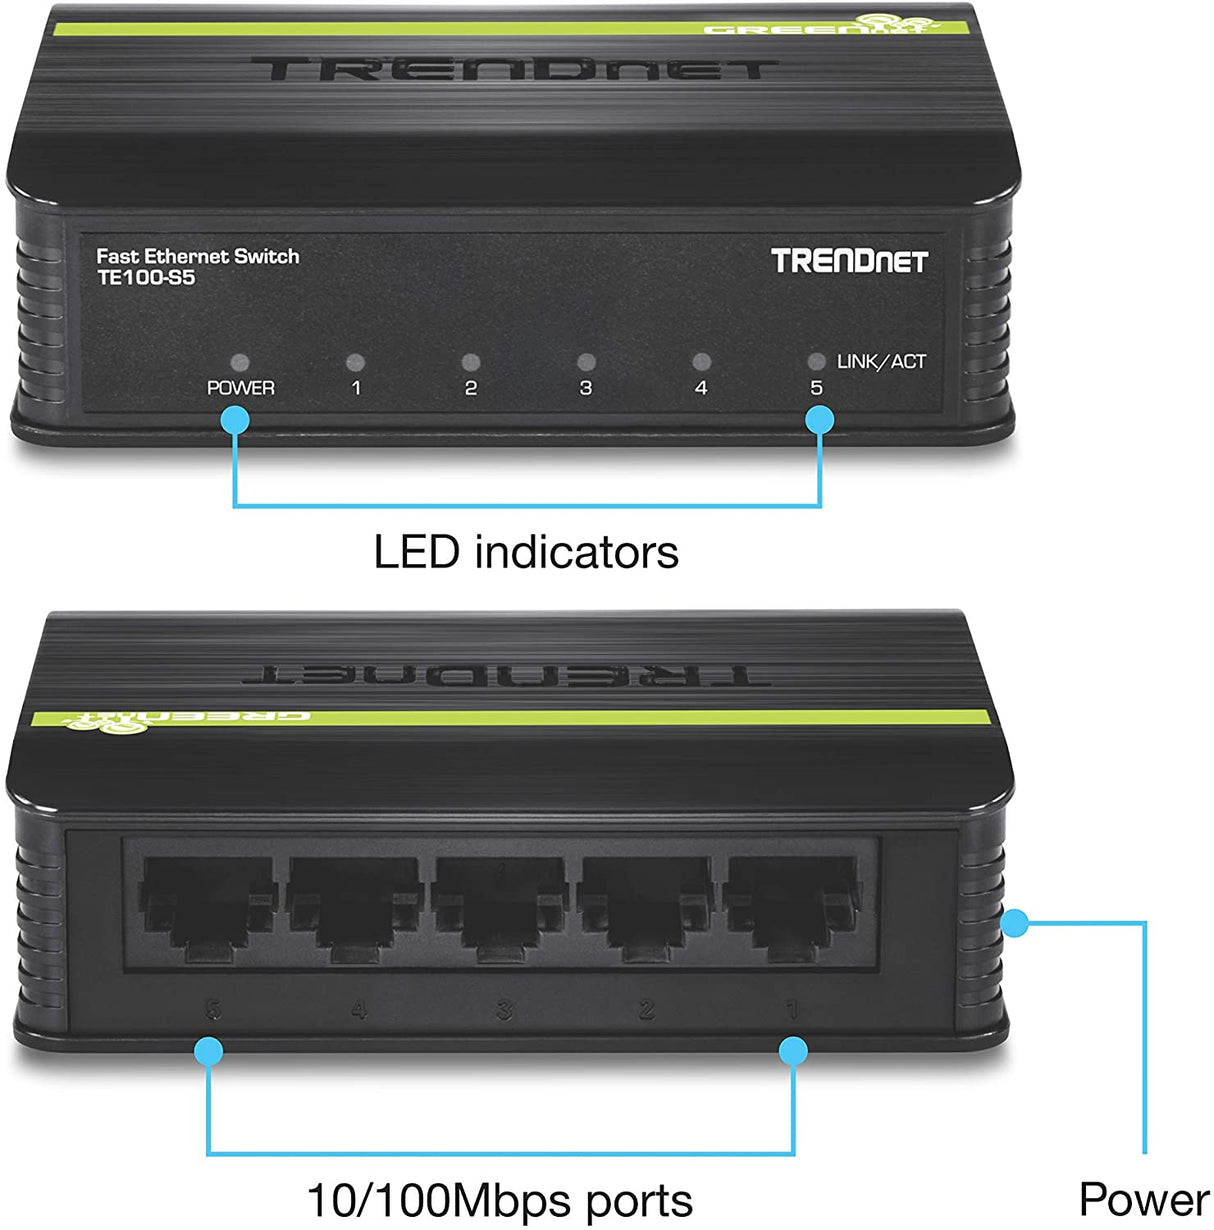 TRENDnet 5-Port Unmanaged 10/100 Mbps GREENnet Ethernet Desktop Plastic Housing Switch, 5 X 10/100 Mbps Ports, 1Gbps Switching Capacity, TE100-S5 5-Port Fast Ethernet